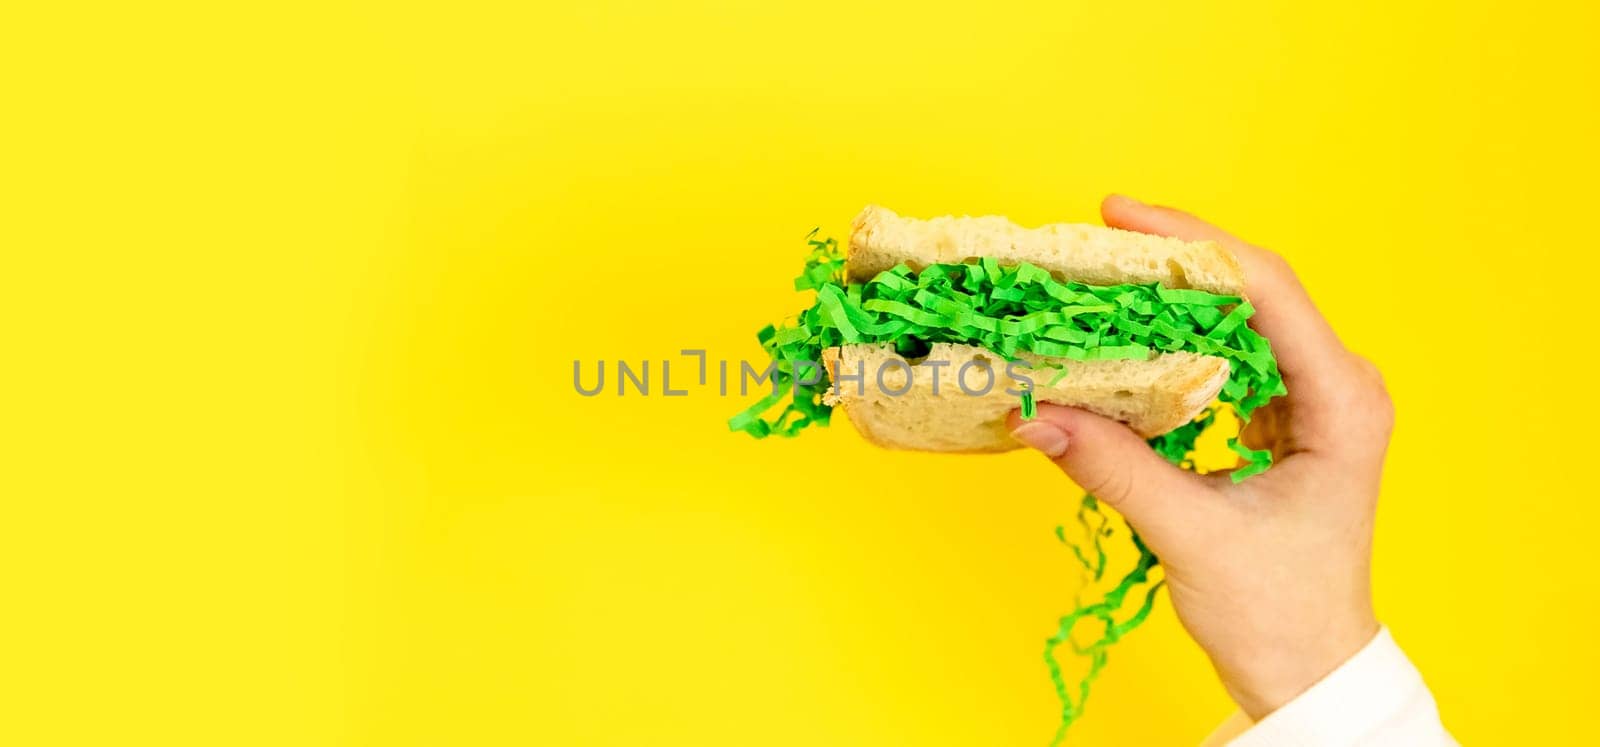 Portrait of one hand of a young Caucasian teenage girl holding a bread sandwich on the right with Easter decorative green hay on a yellow background with with copy space on the left on a spring day in the room, side view close-up with depth of field.